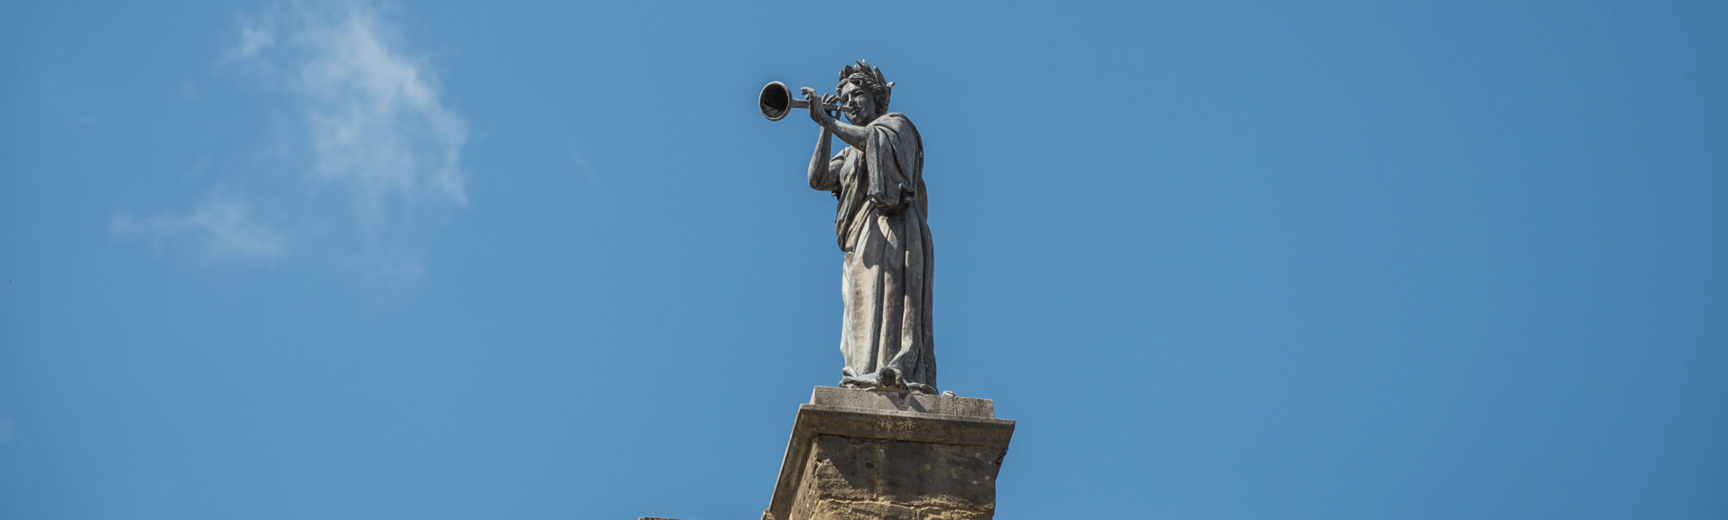 Statue of a woman against blue sky